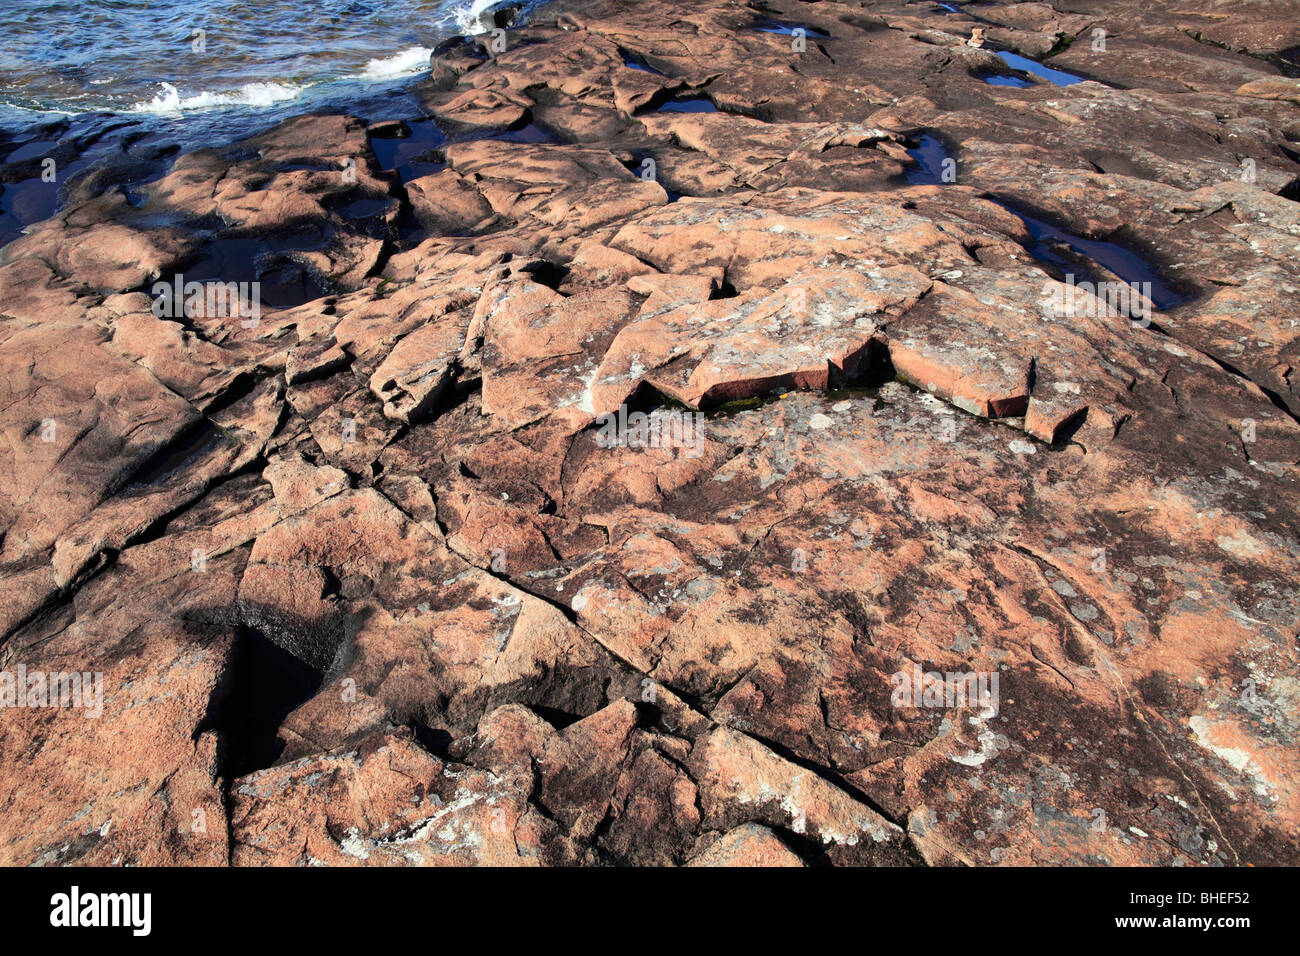 Fracture patterns on ancient lava flow along the shore of Lake Superior in Grand Marais, Minnesota. Stock Photo